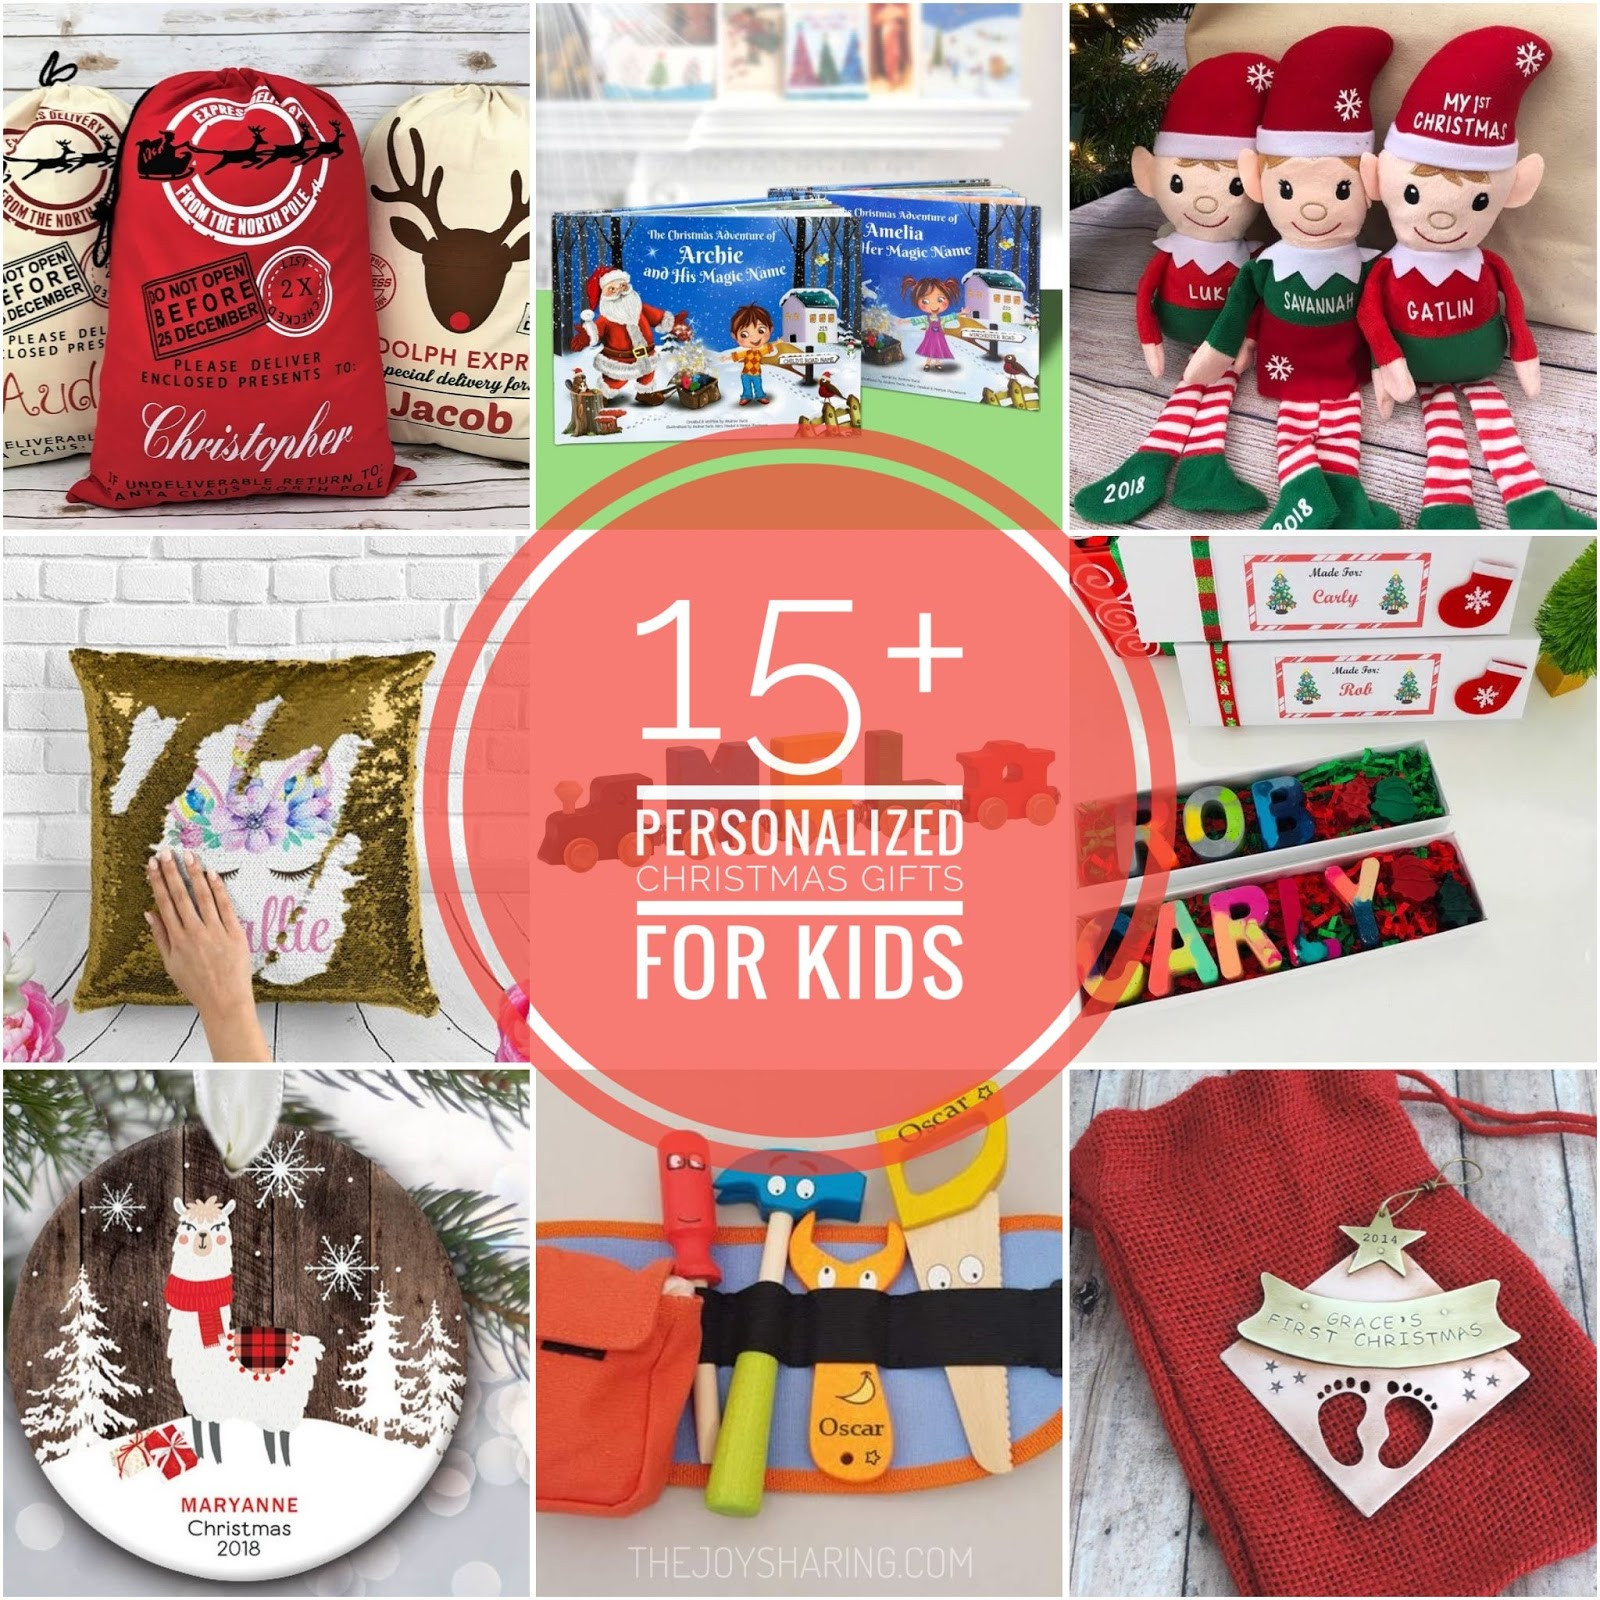 Personalized Gifts Kids
 15 Personalized Christmas Gifts for Kids The Joy of Sharing